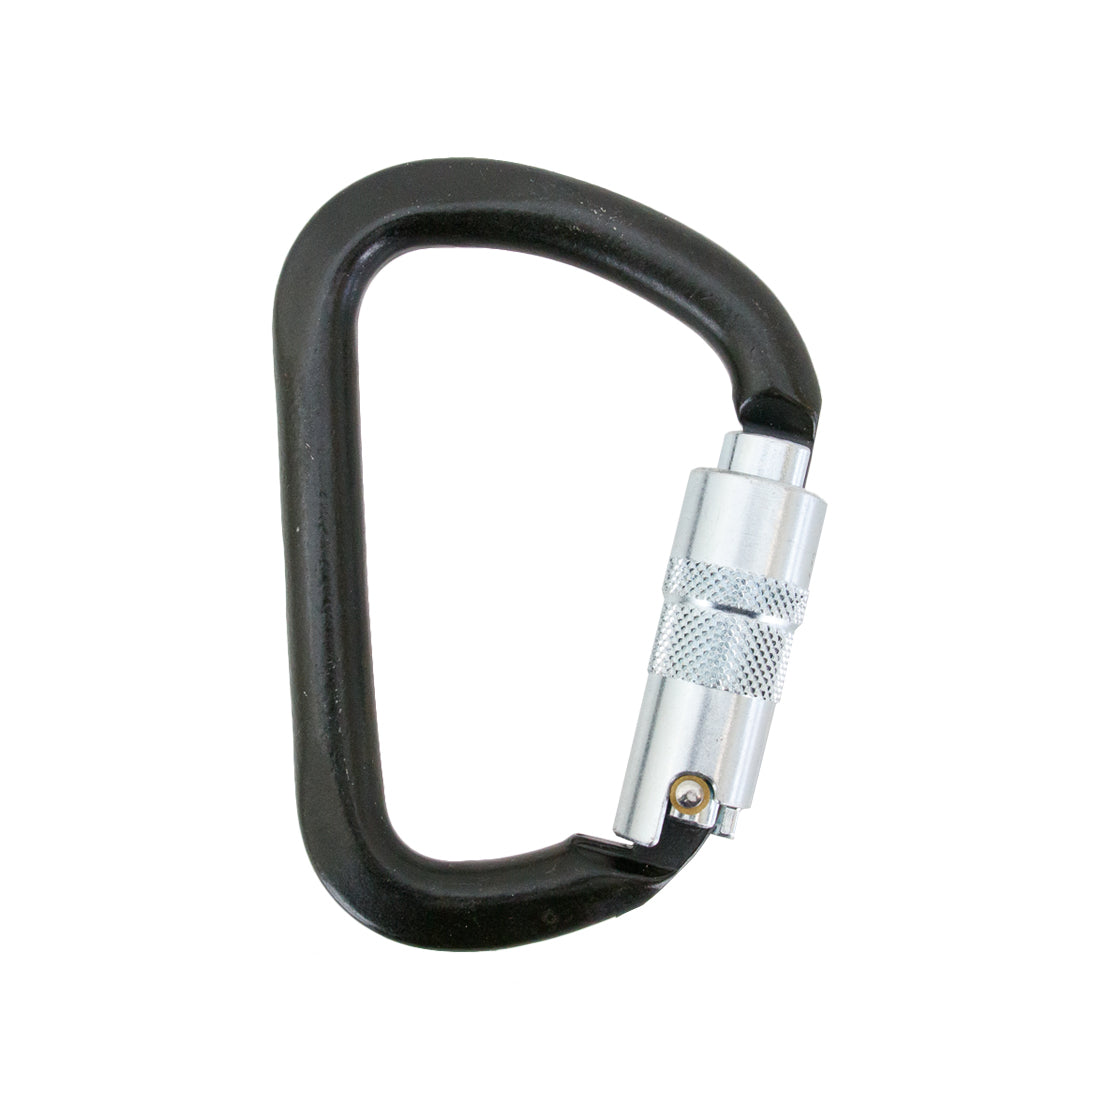 KONG ANSI Steel Carabiner Triple Lock - Extra Large - RIght Side View